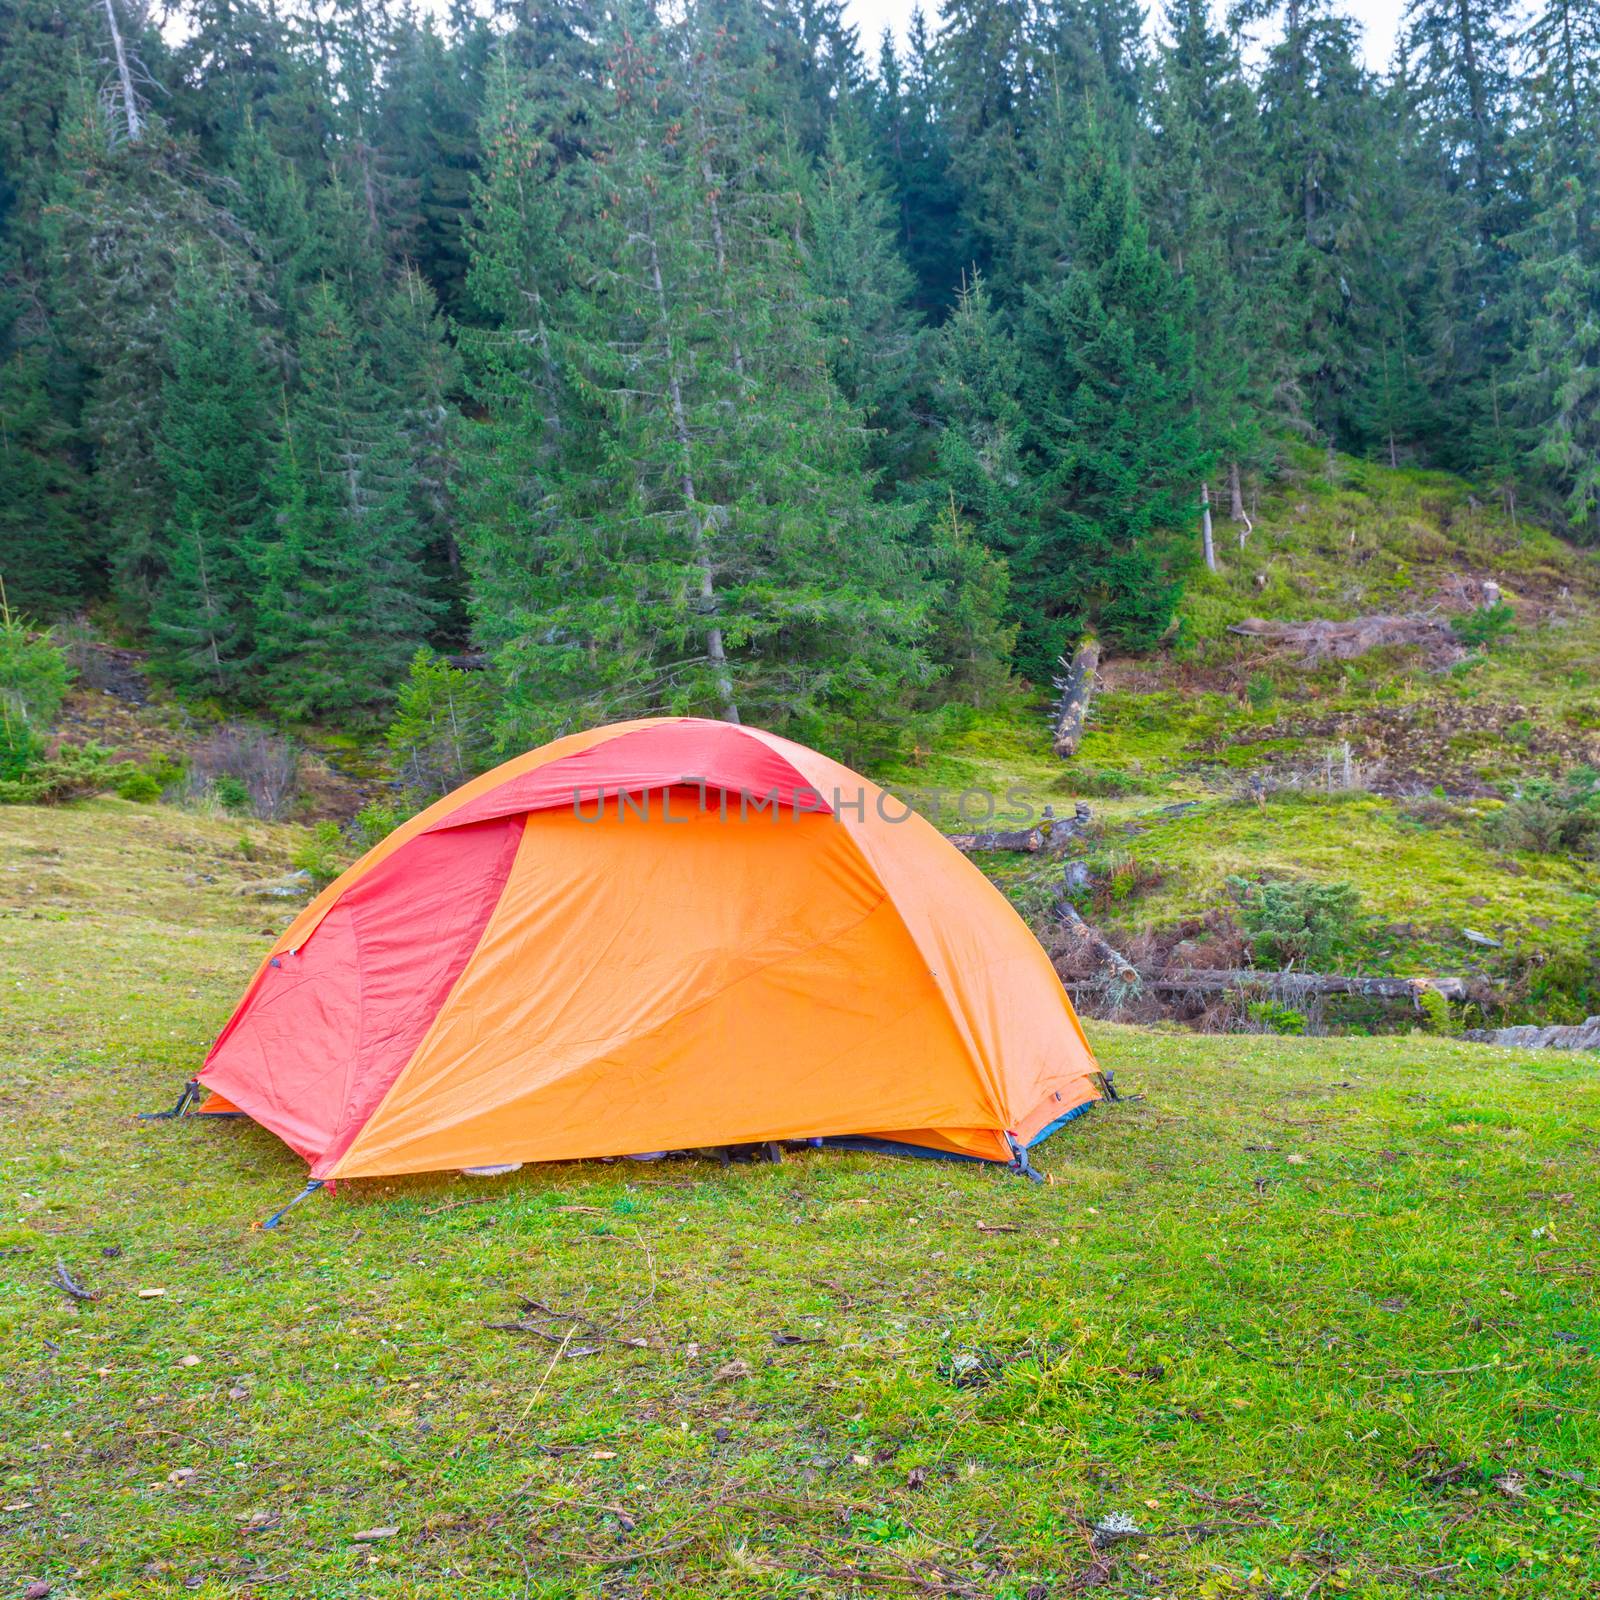 Orange camping tent in a green forest.